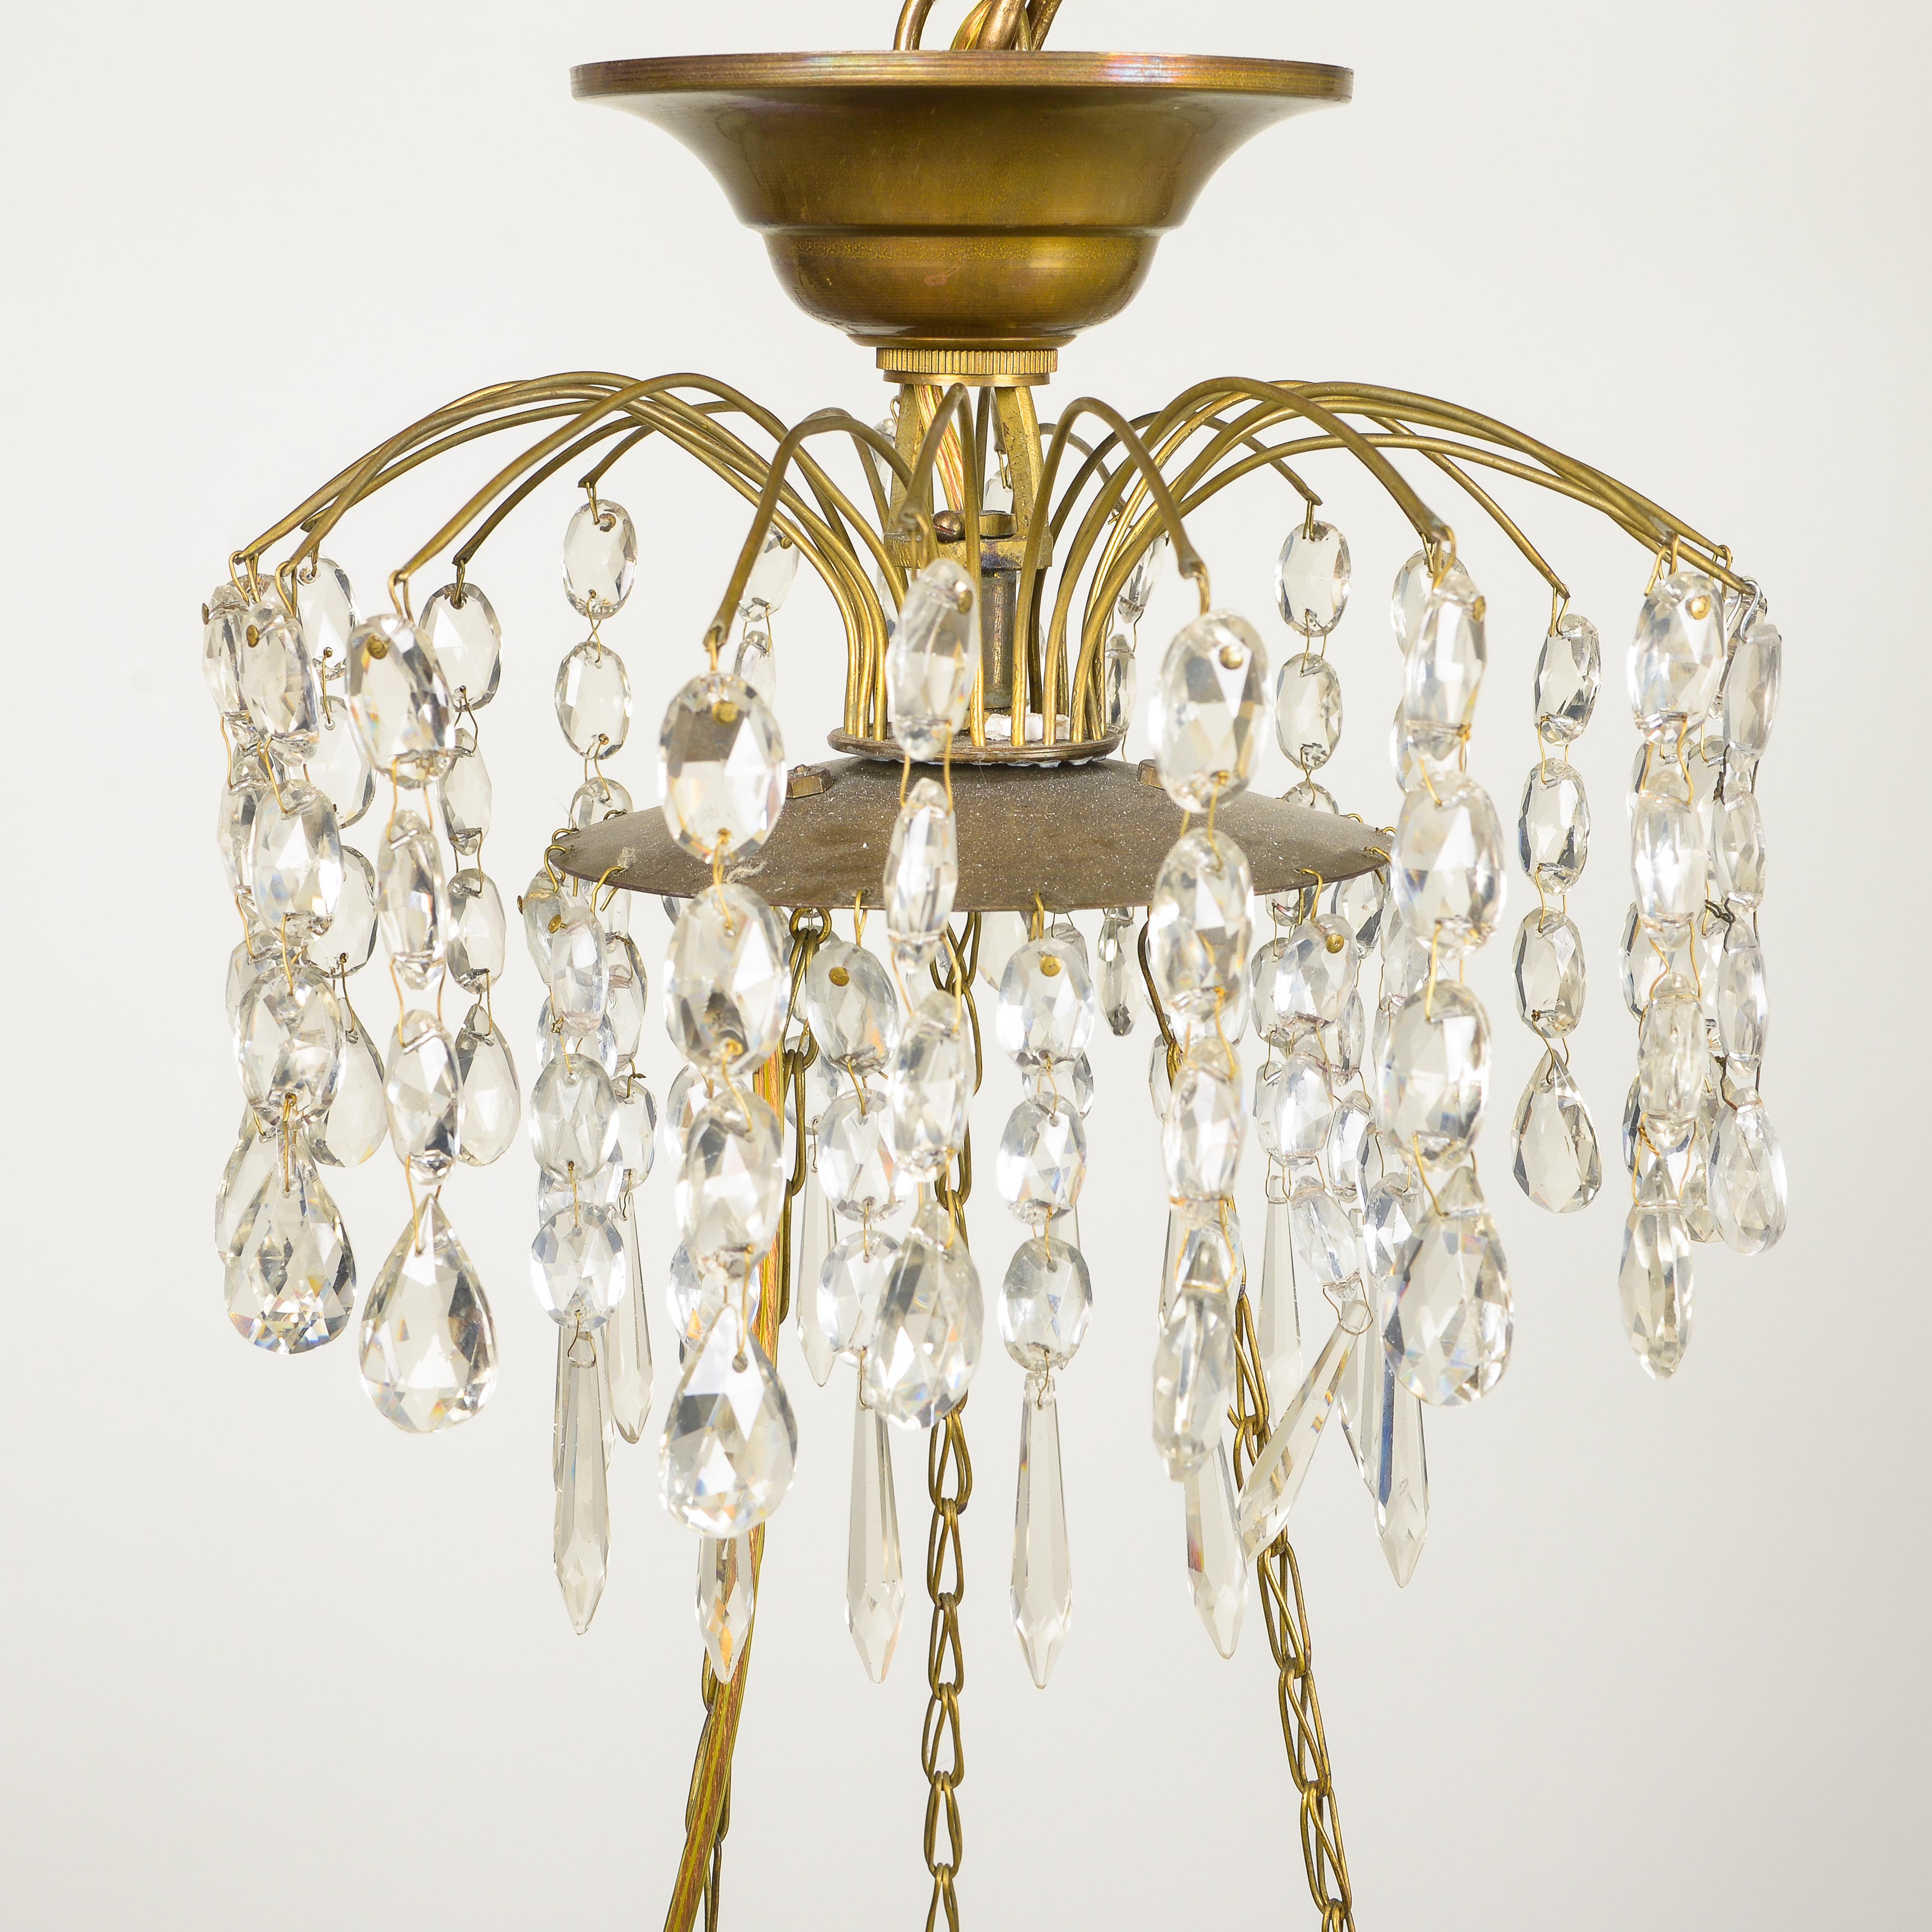 Early 20th Century Baltic Crystal, Cobalt Glass, and Gilt-Bronze Three-Light Chandelier For Sale